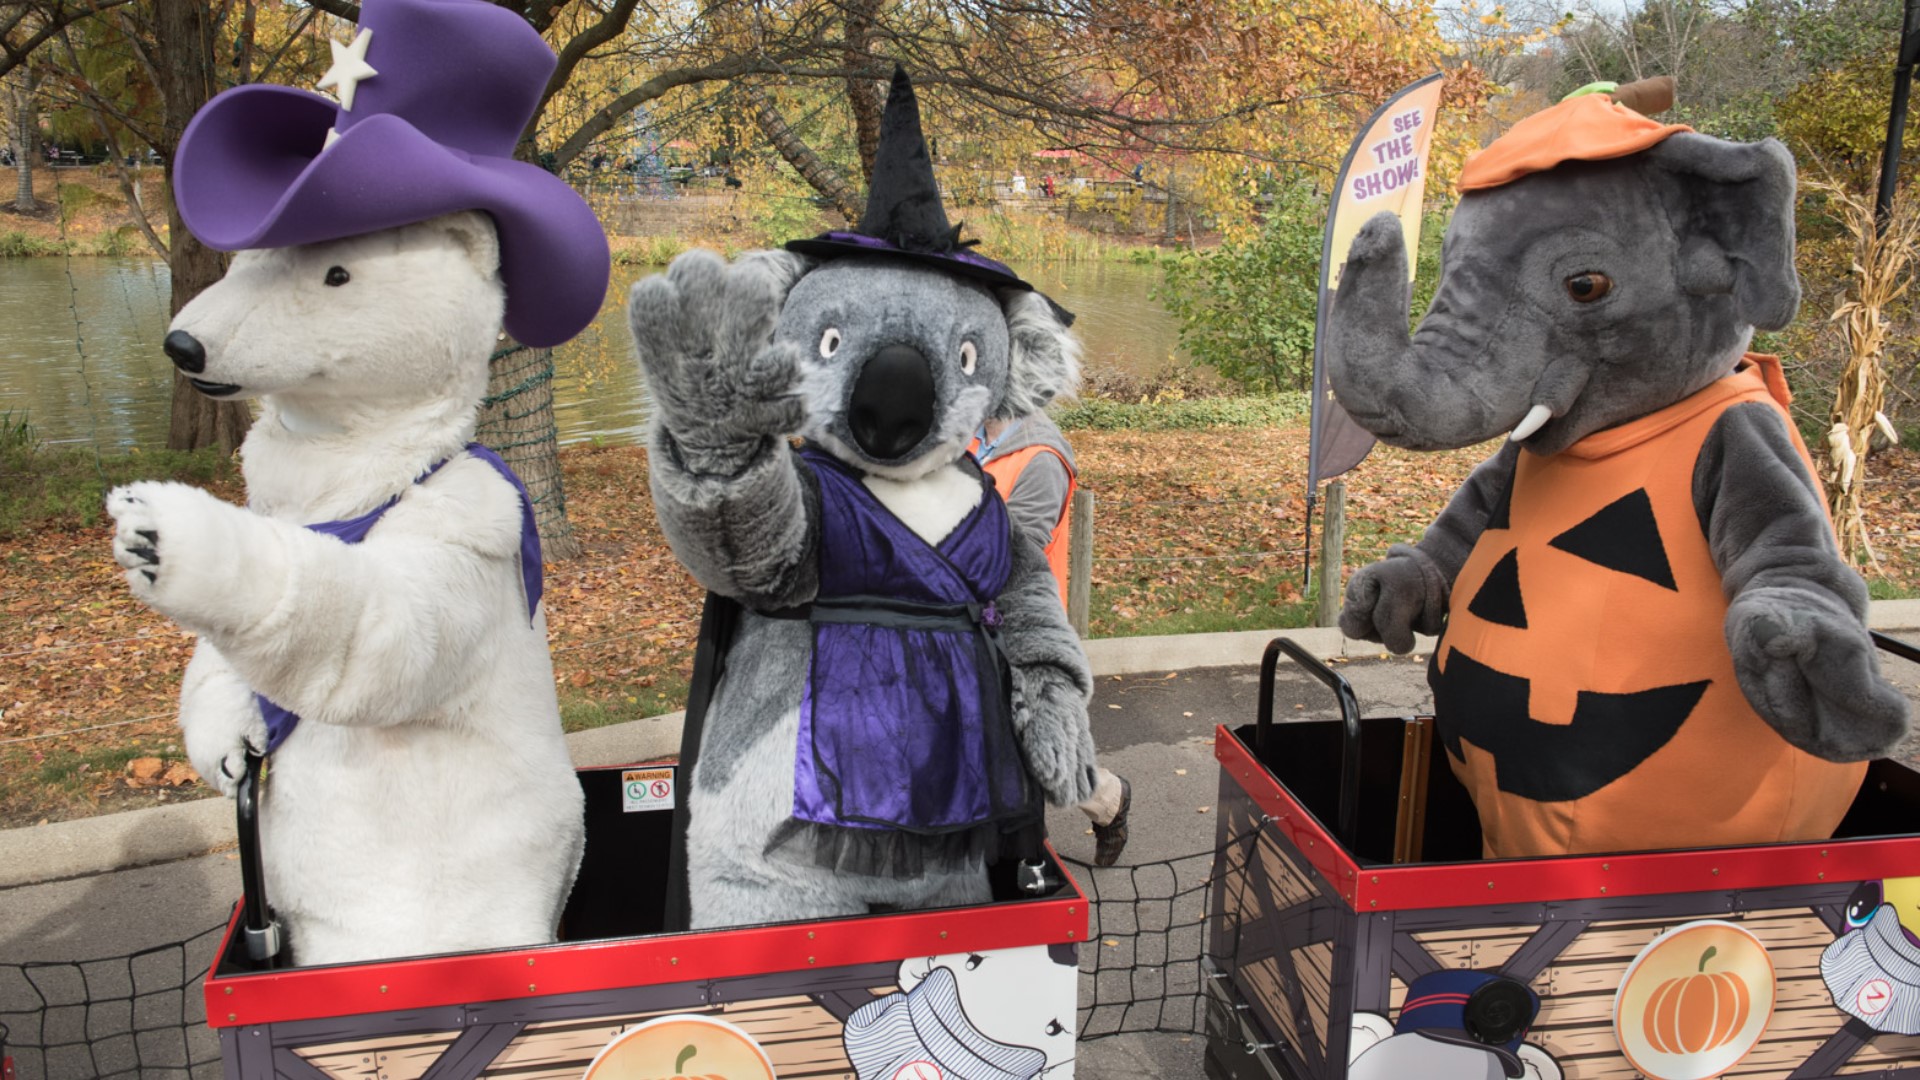 Columbus Zoo's 'Boo at the Zoo' returns Oct. 14